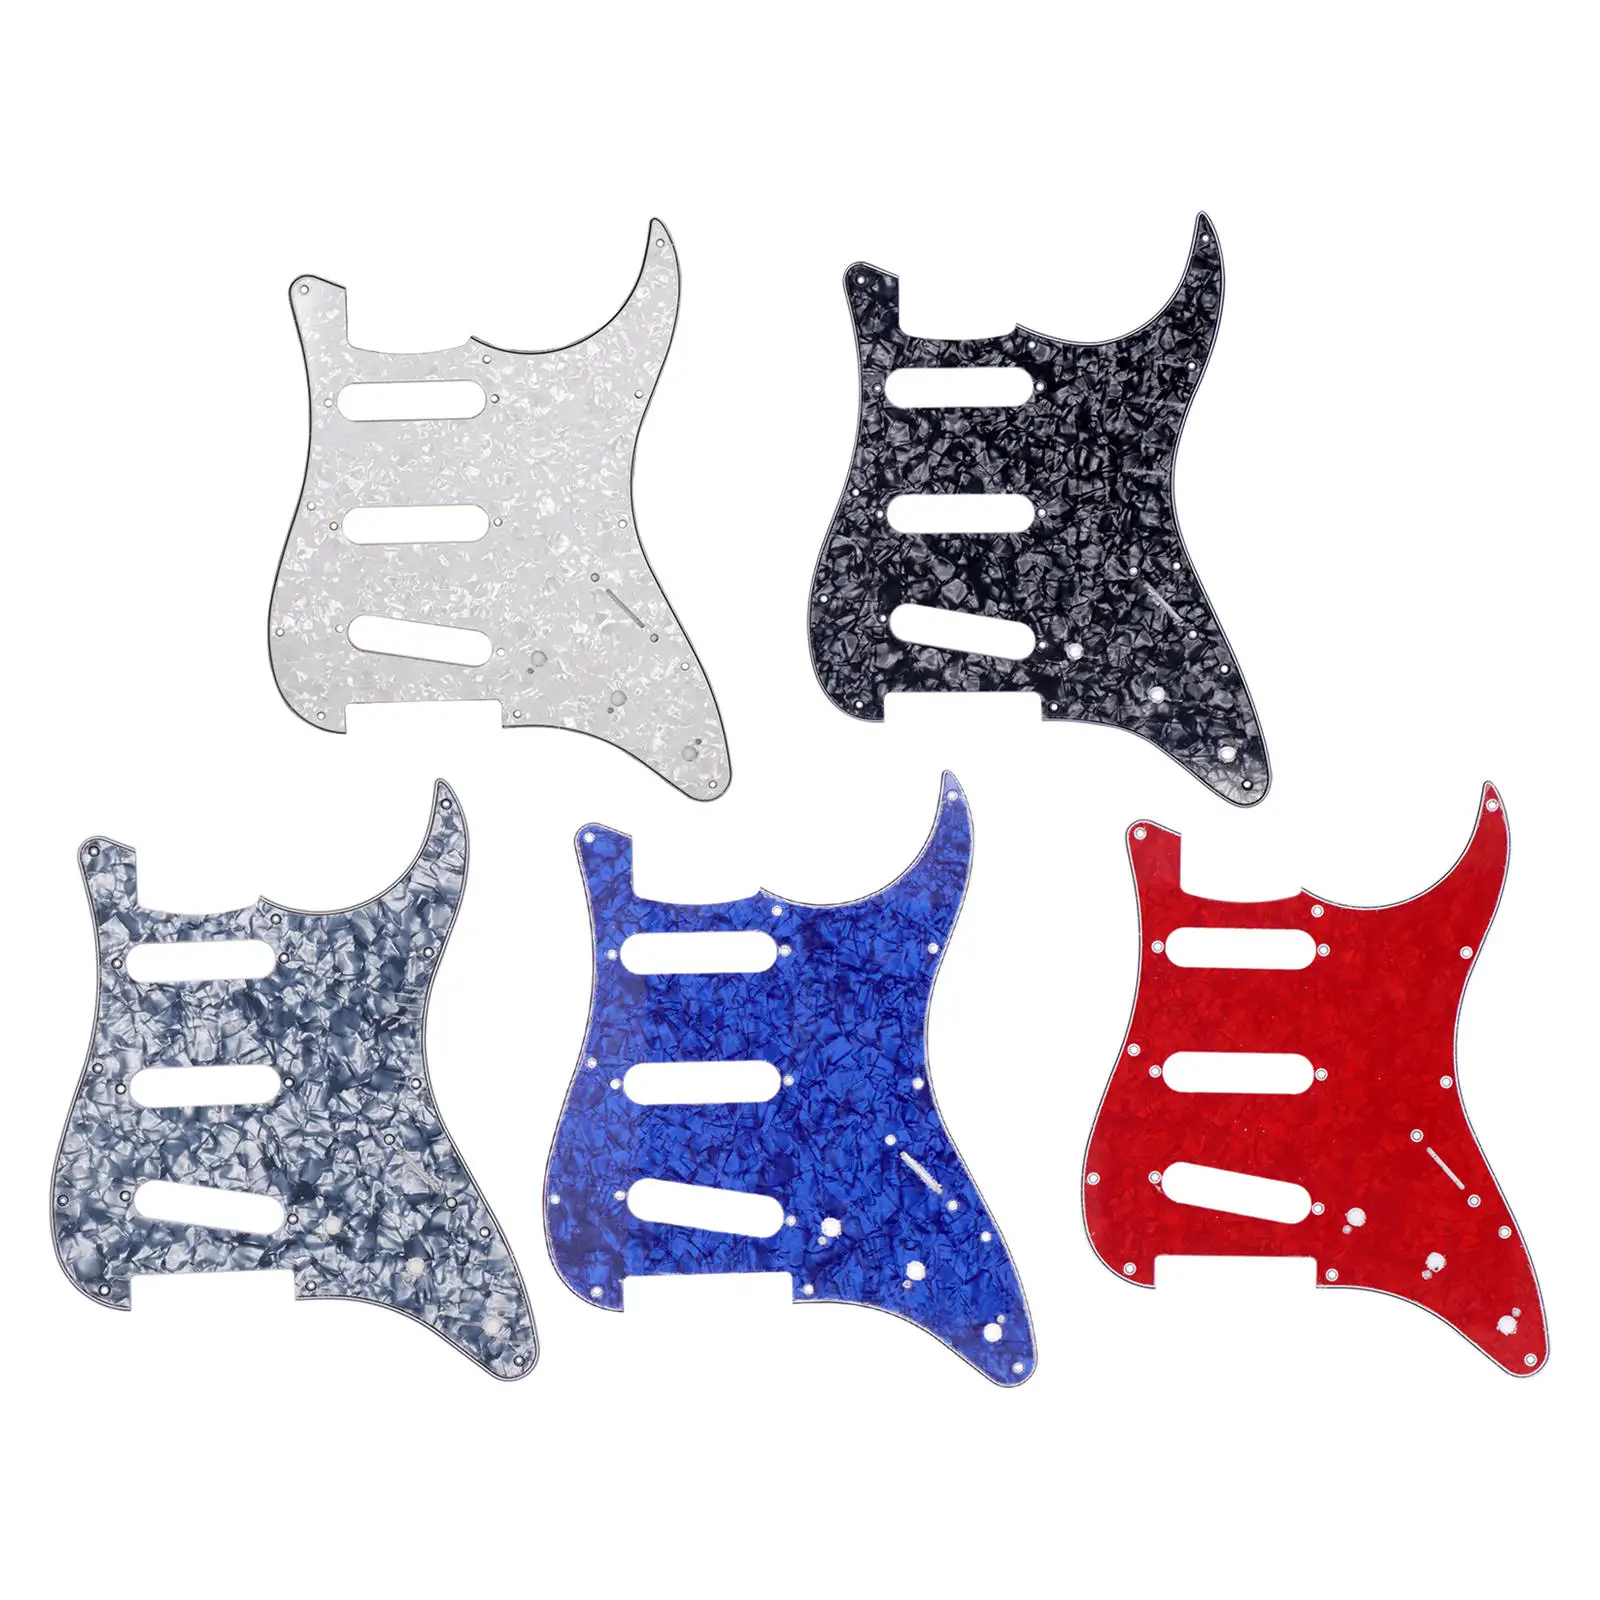 11 Hole ST SQ SSS Single Coil Pickups Guitar Pickguard Scratch Plate without Screws for SUSA/Mexican Made Guitar Stratocaster